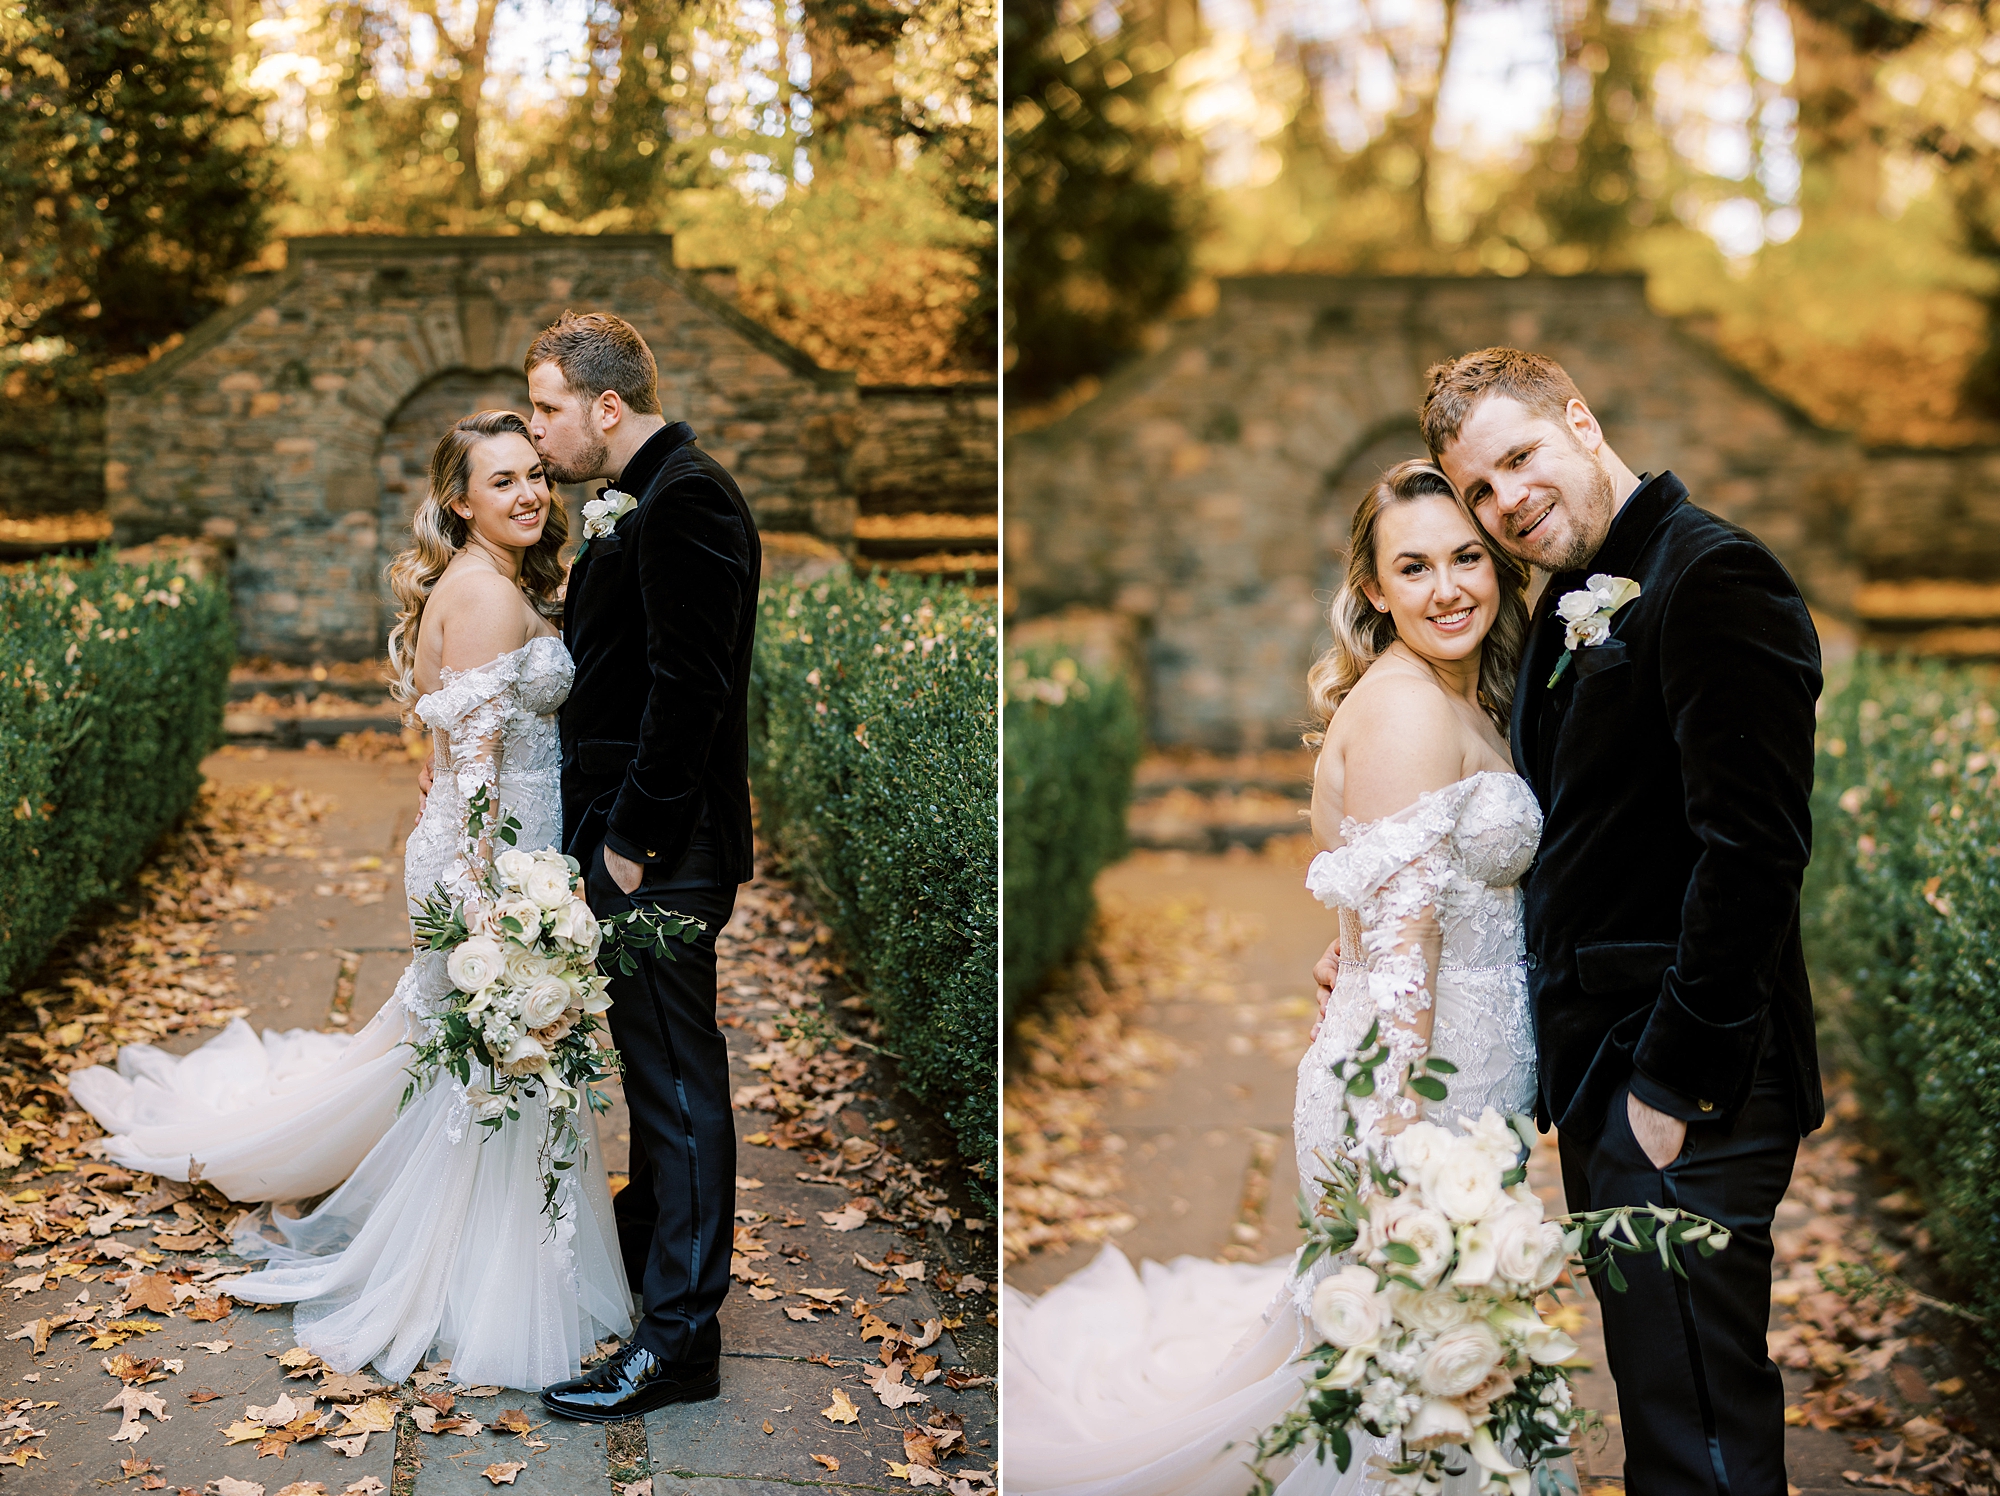 newlyweds hug in front of stone wall in garden at Parque Ridley Creek